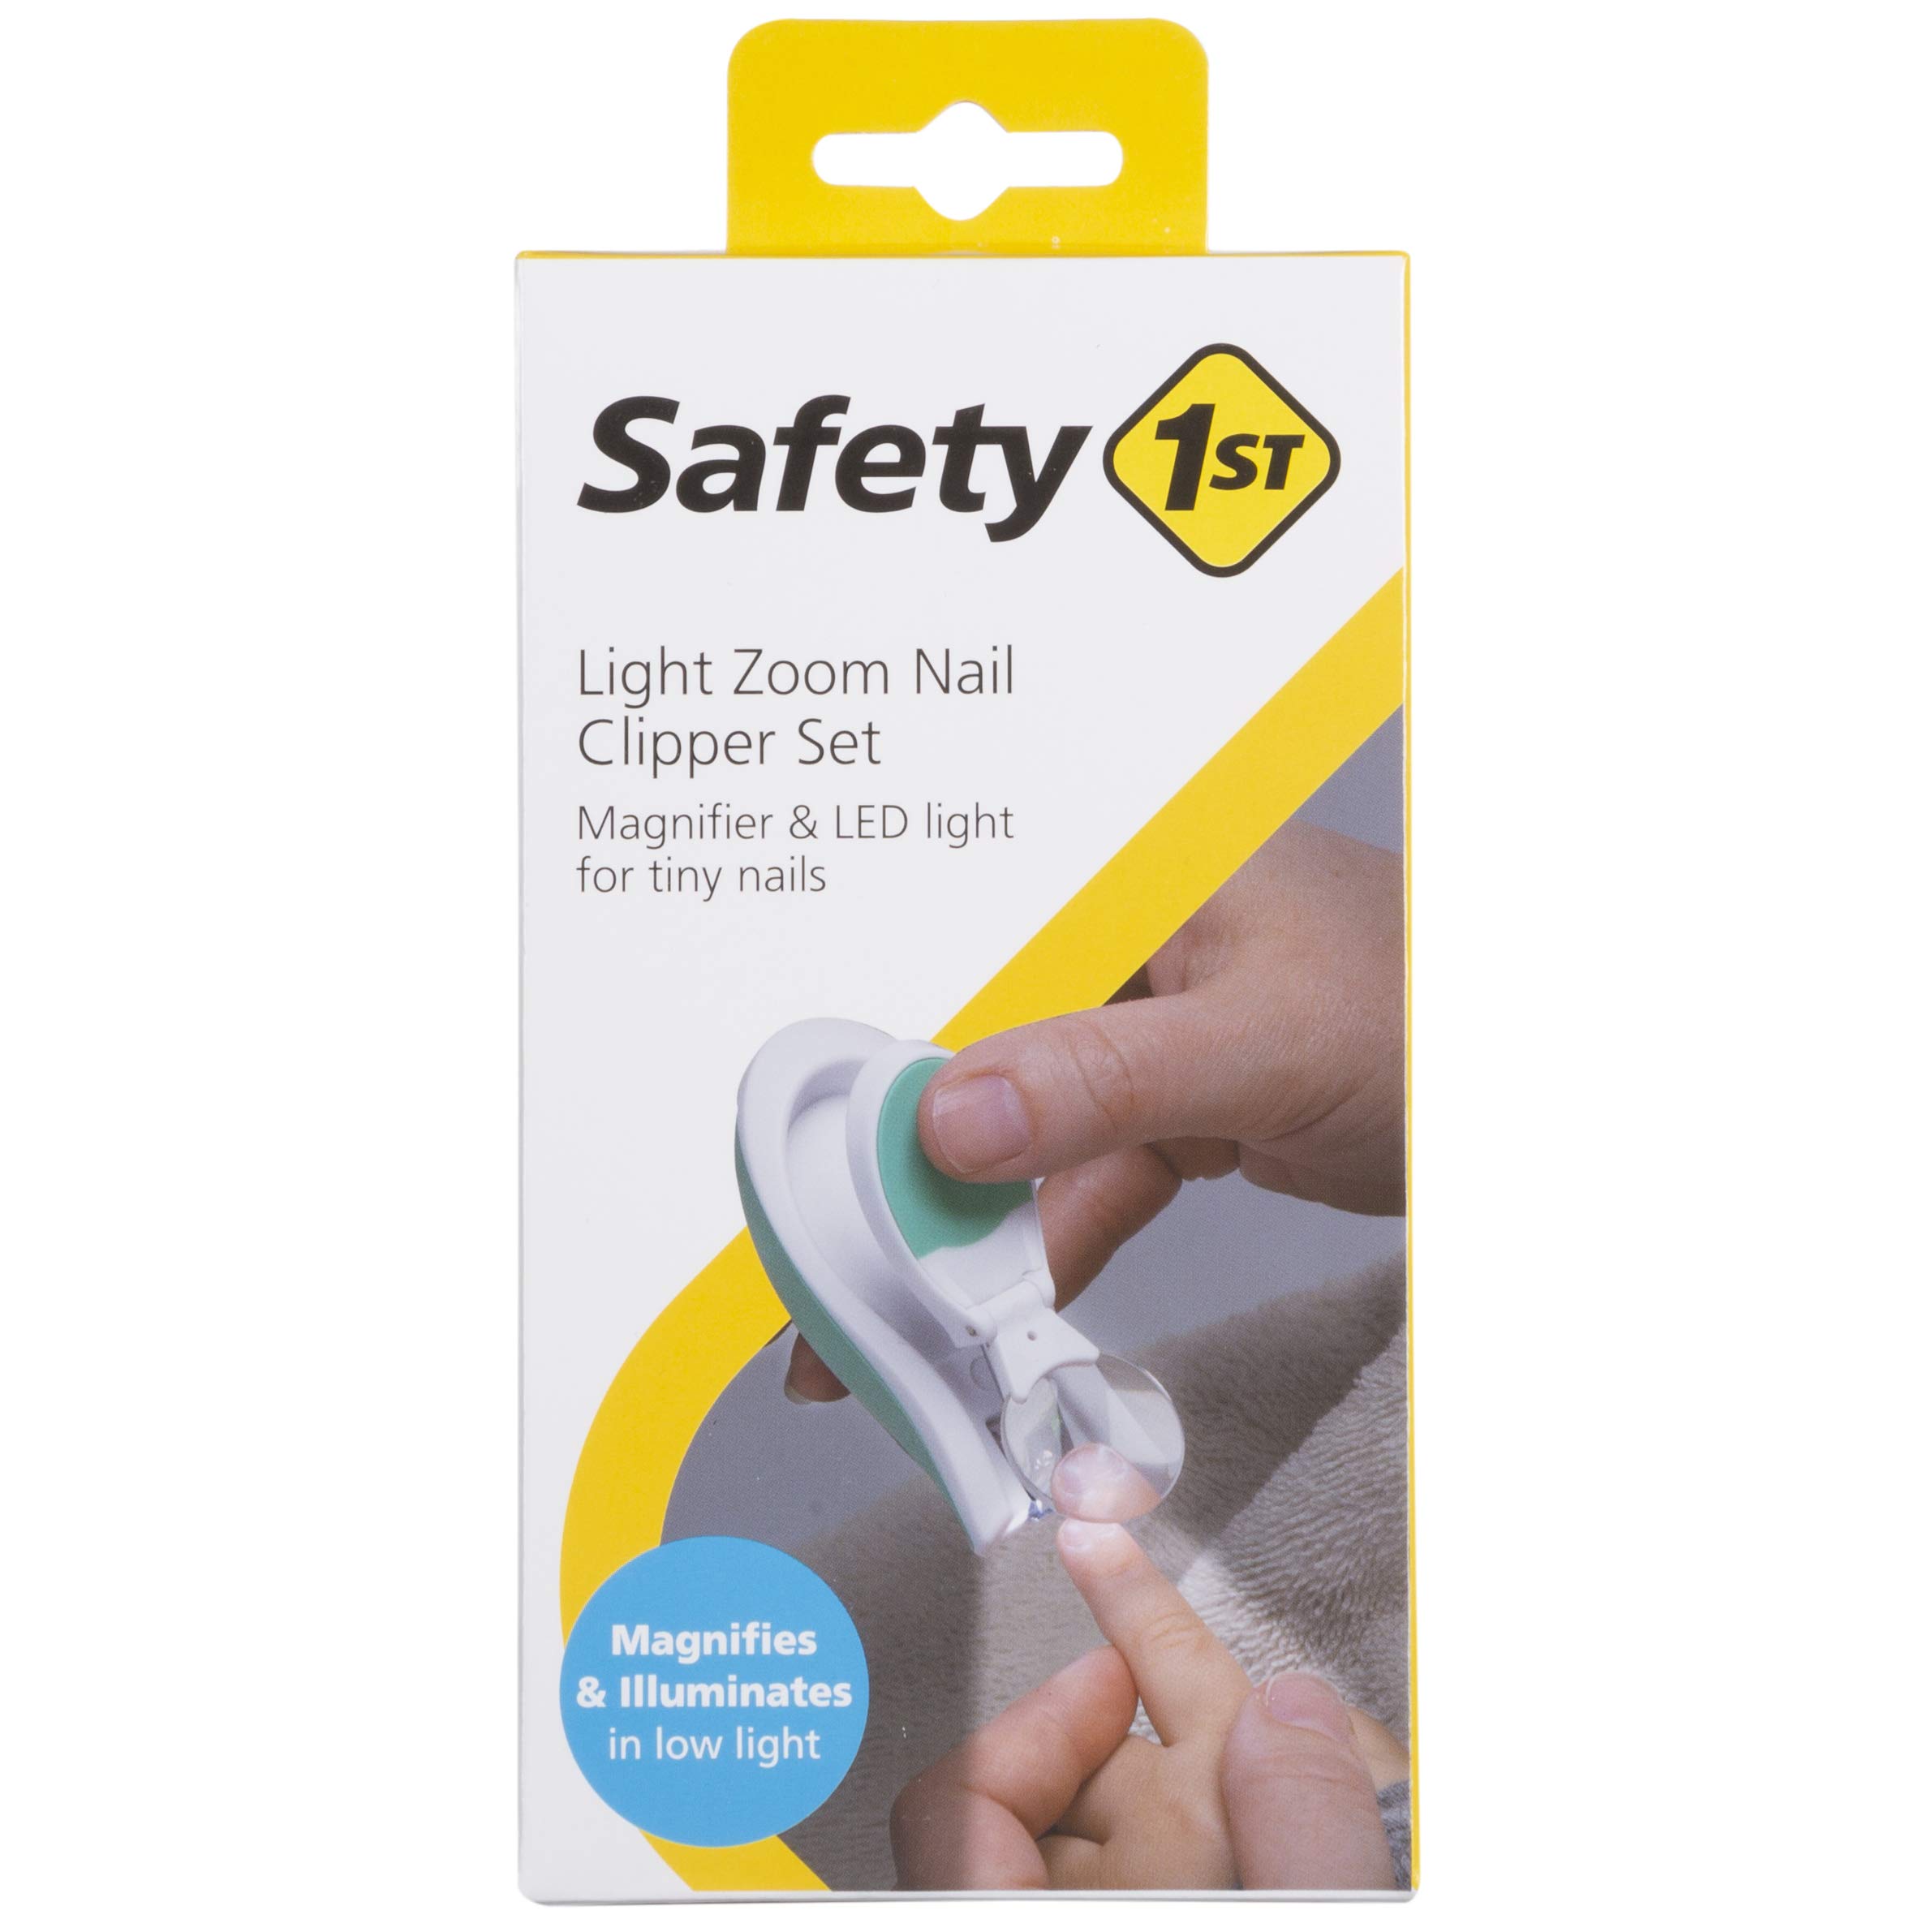 Safety 1st Light Zoom Nail Clippers, One Size